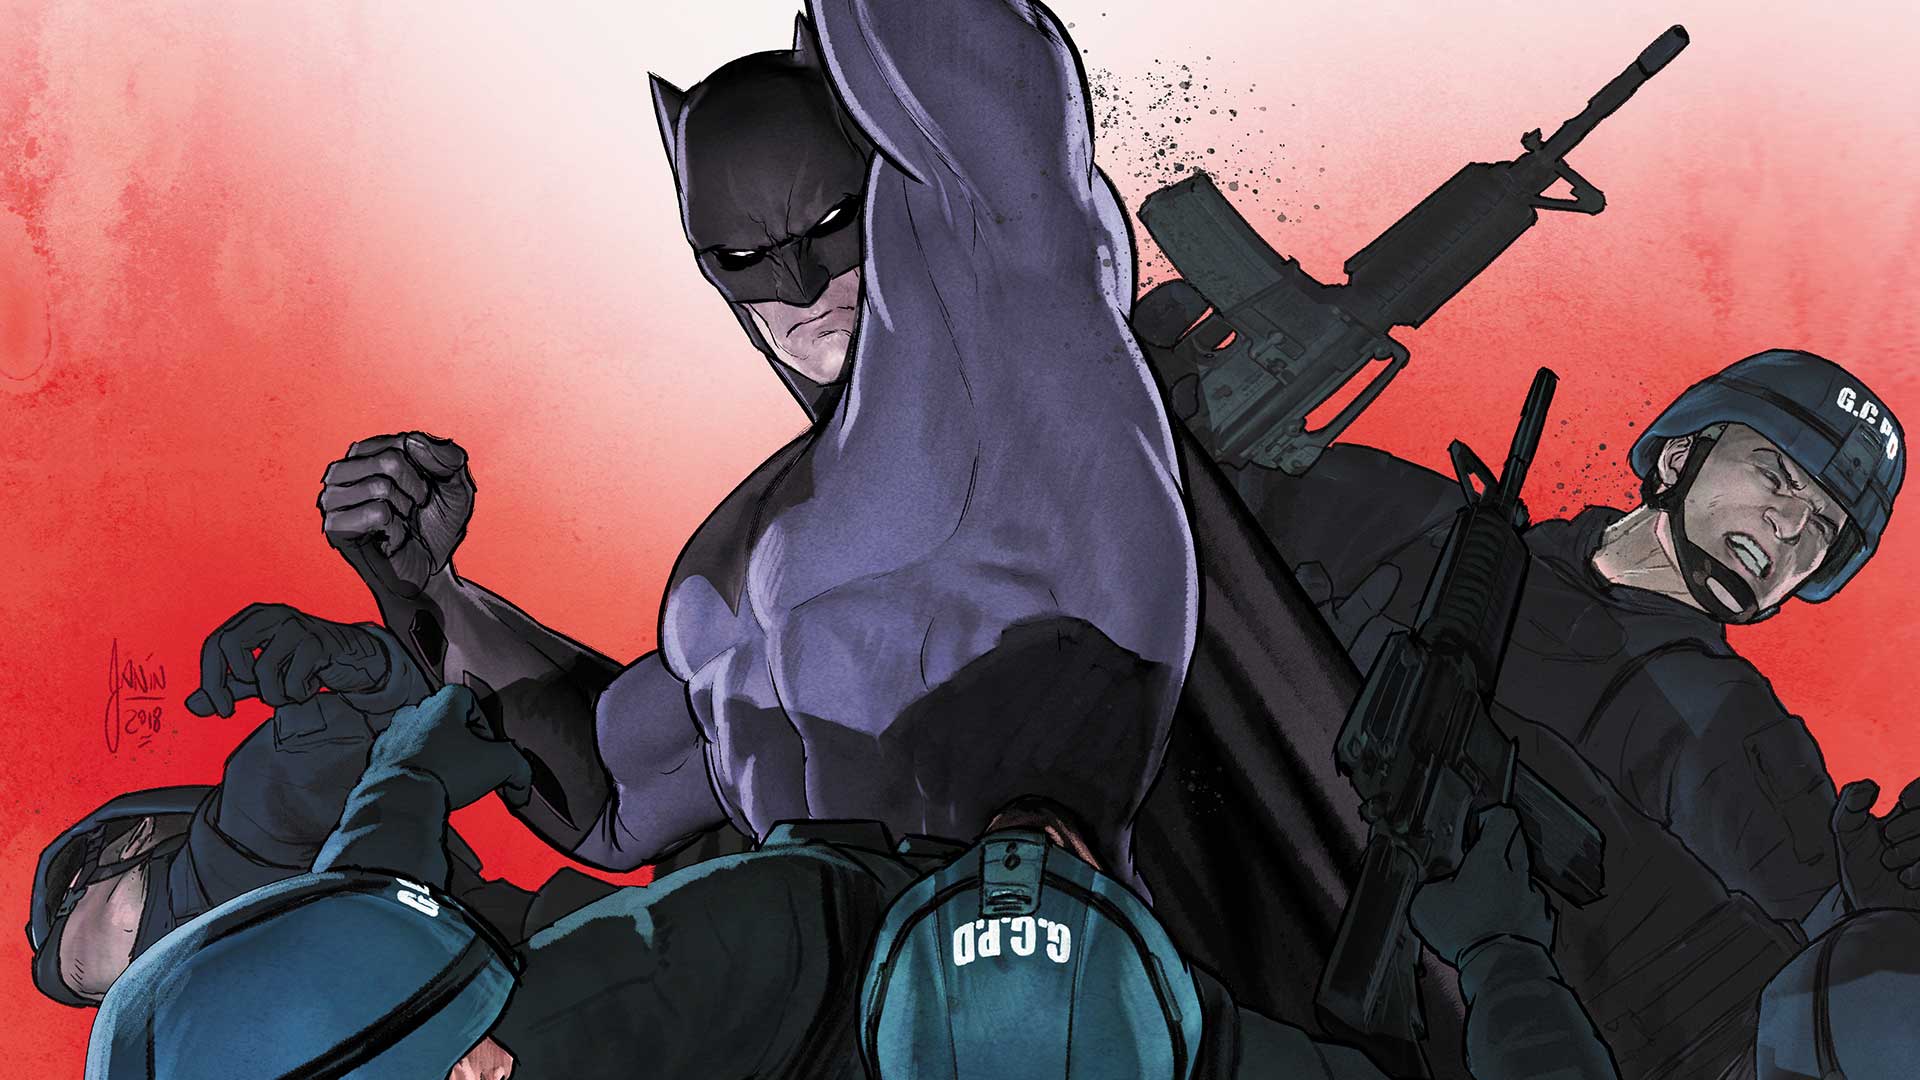 Batman #59 review: Penguin love and padded cell combat